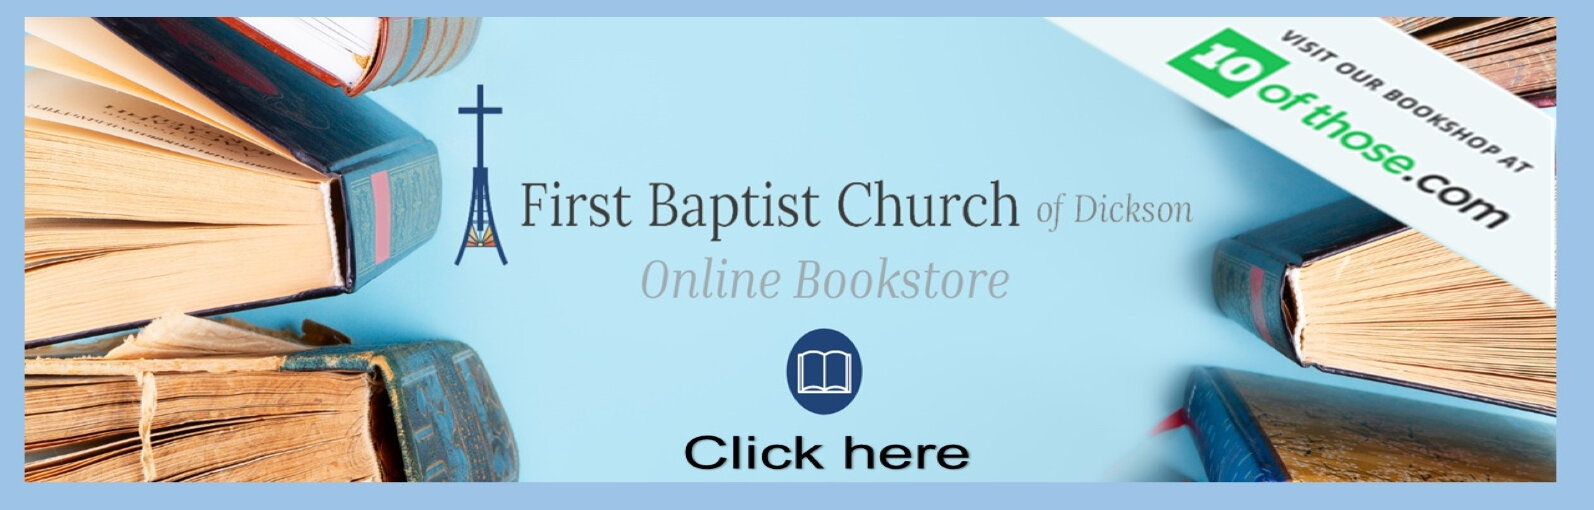 /images/r/fbc-bookstore-on-10-of-those-click-here-banner-1/c1594x510/fbc-bookstore-on-10-of-those-click-here-banner-1.jpg